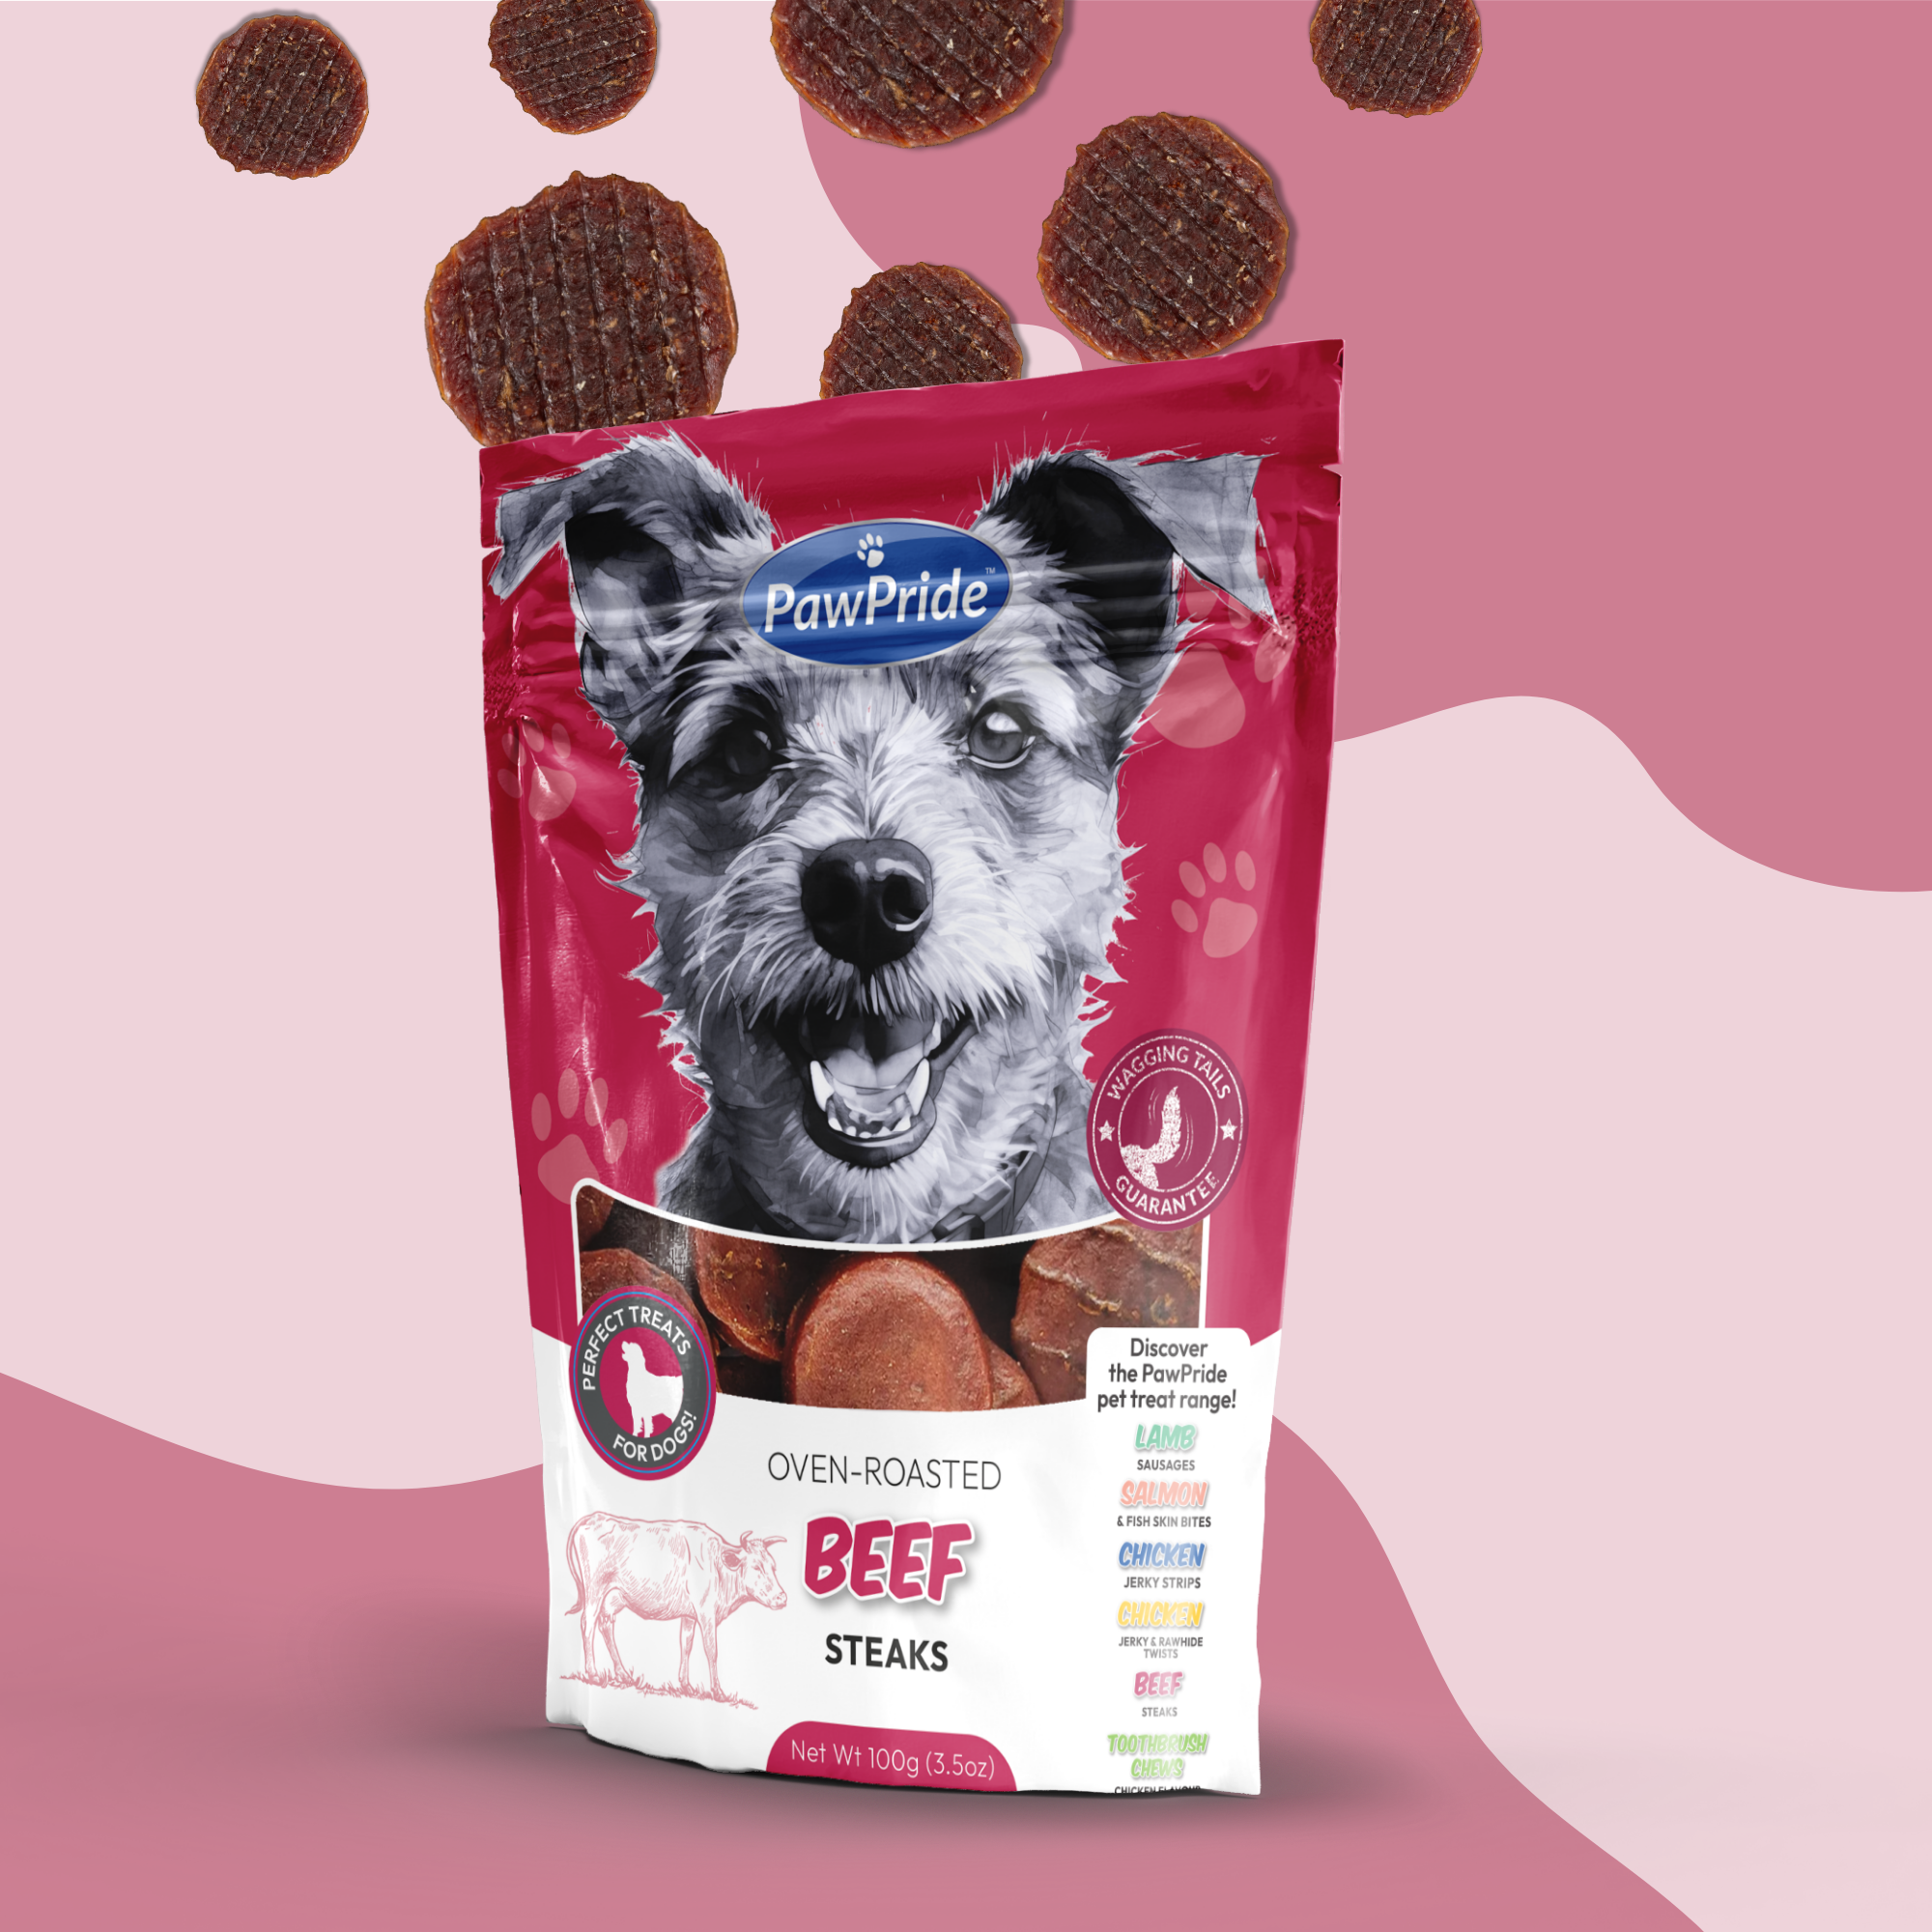 Beef Steaks - Dog Treats from PawPride